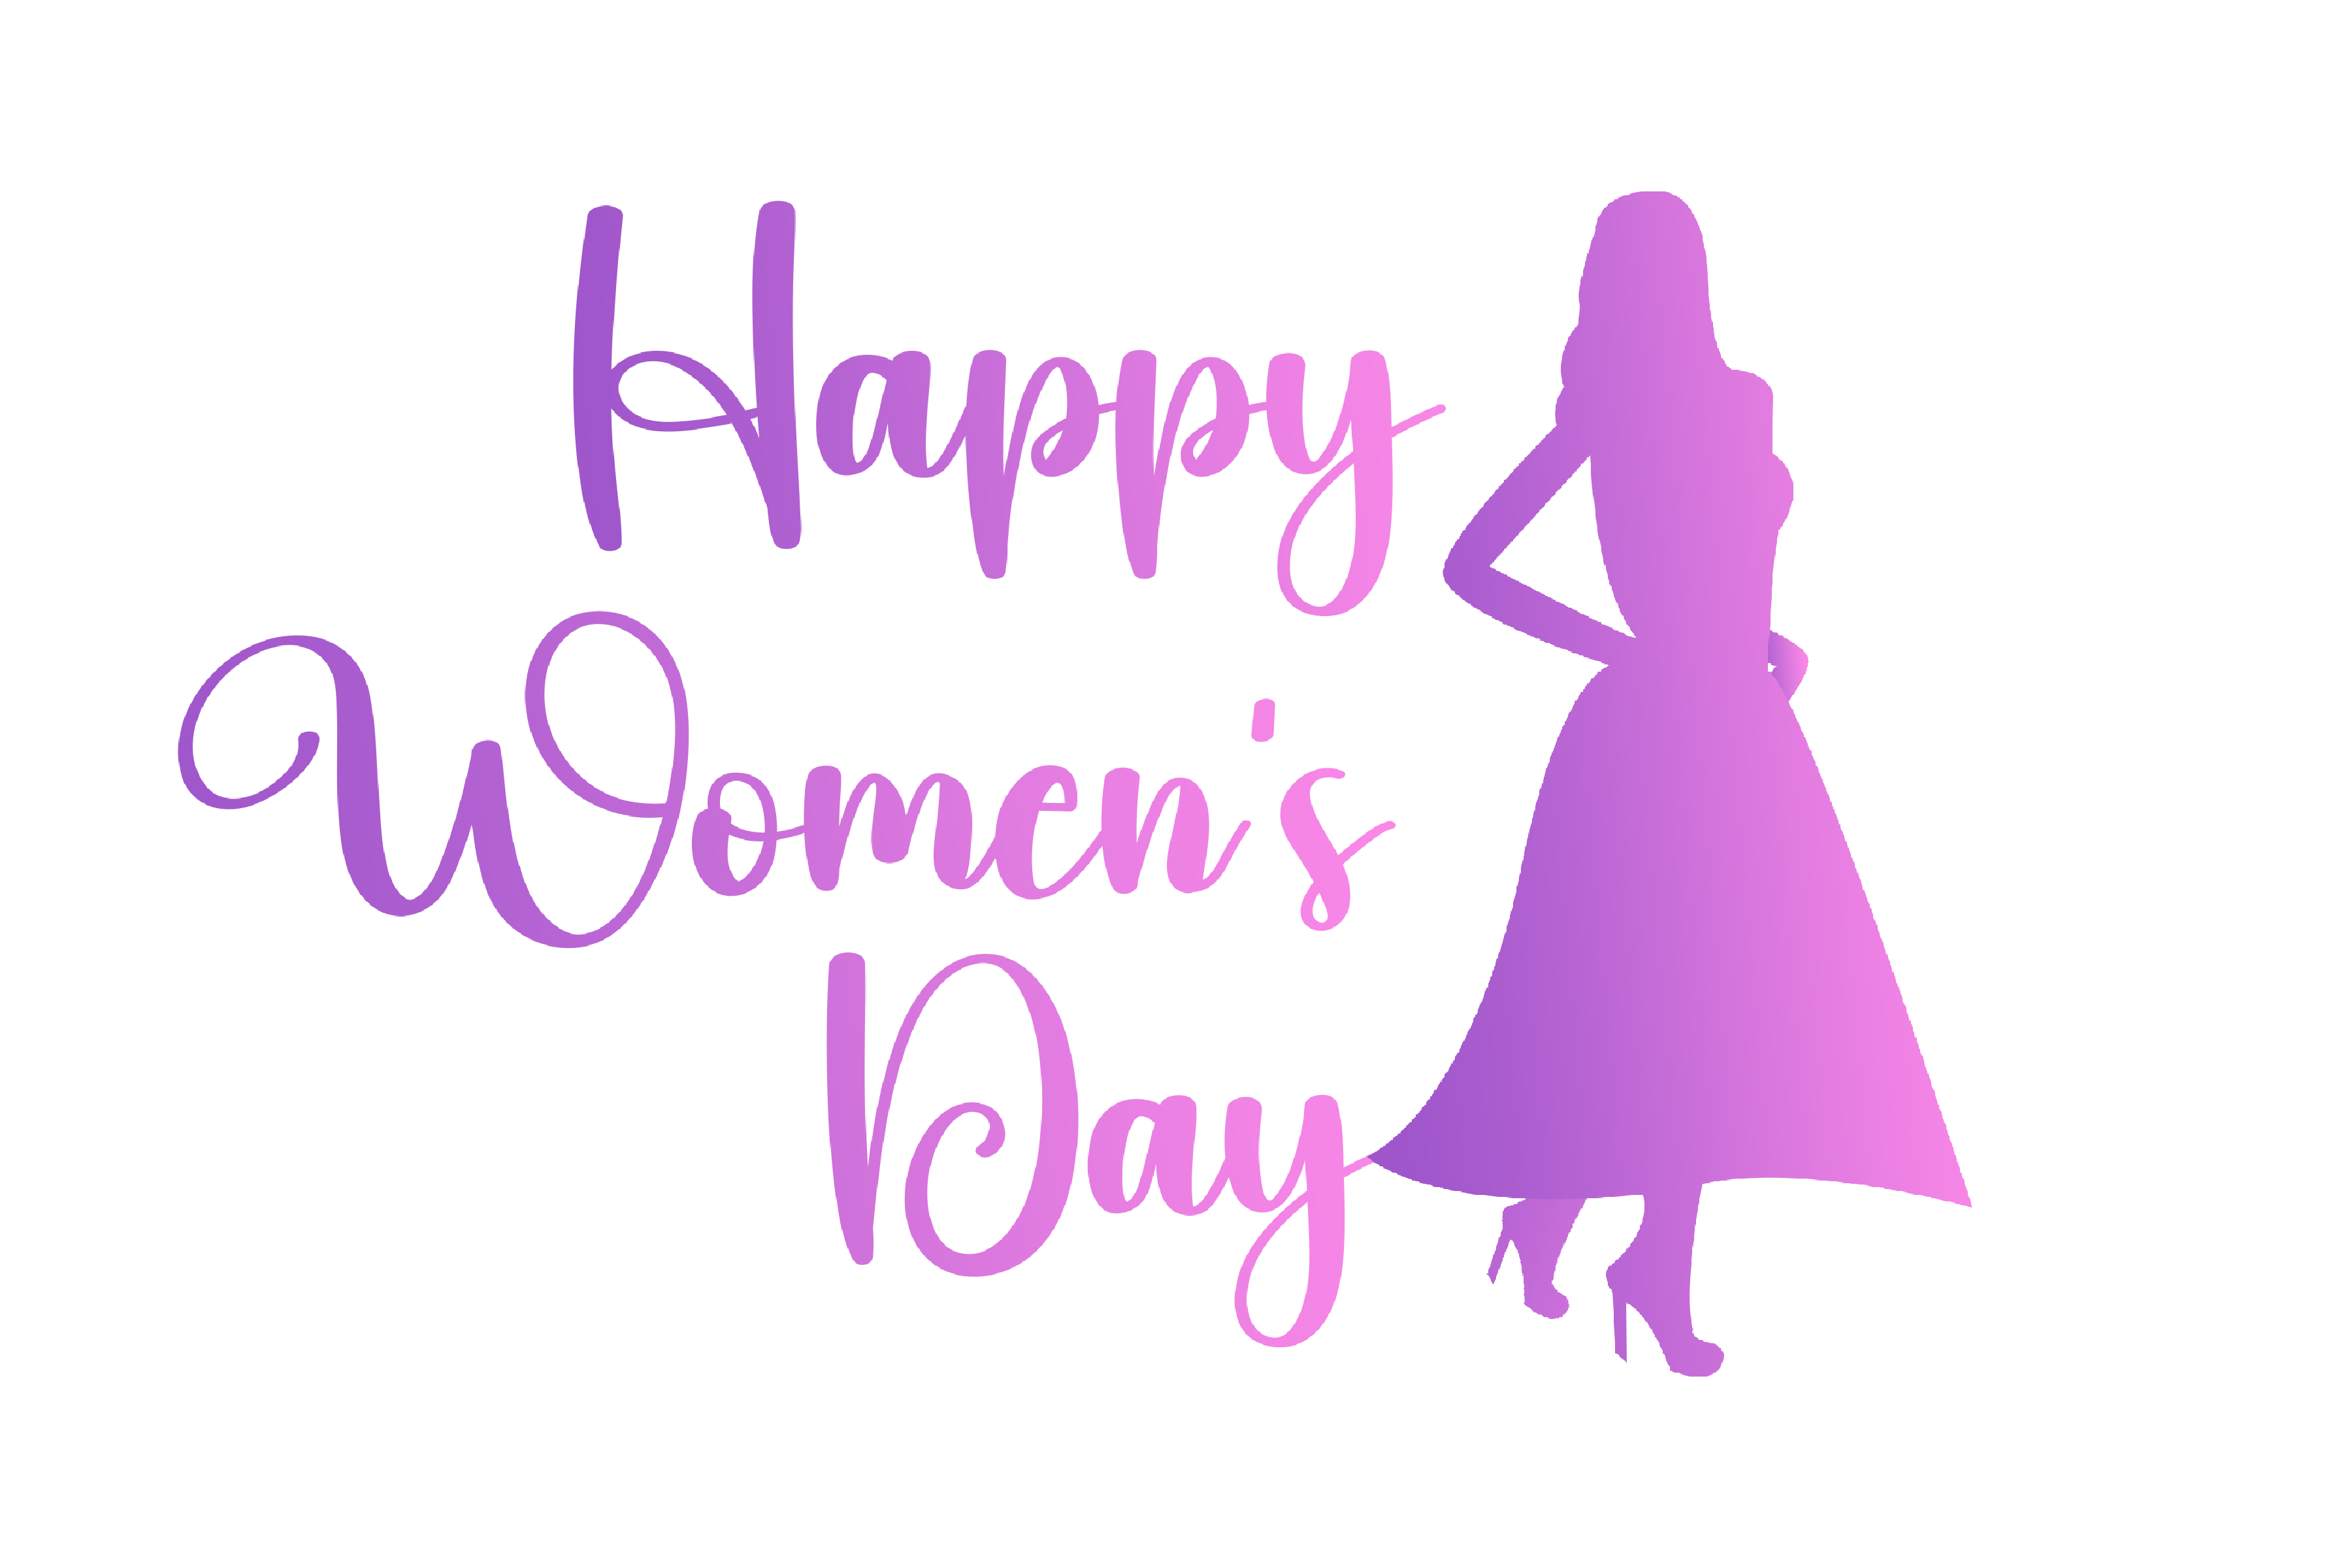 Happy Women's Day PNG Free Download